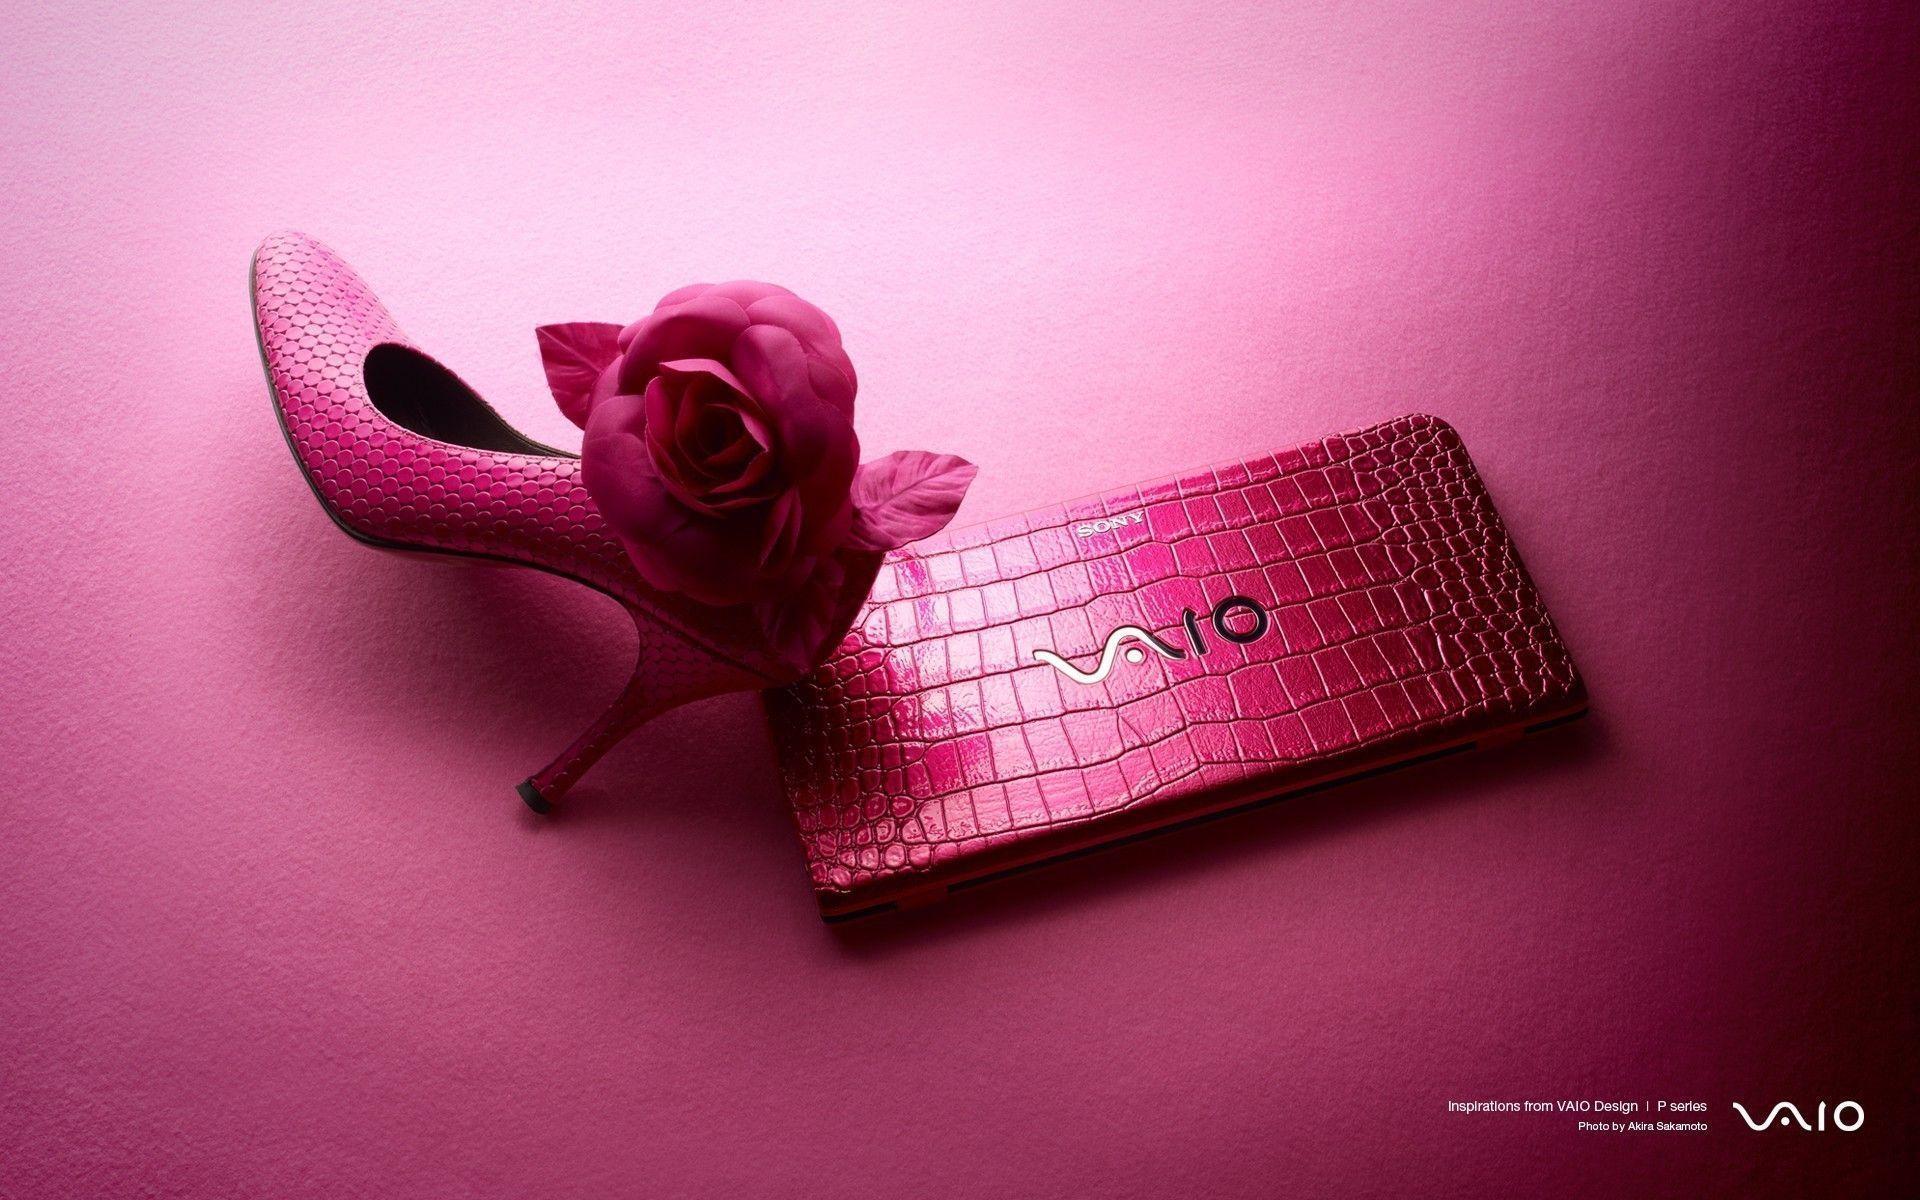 Vaio Wallpaper, laptop, shoes, pink background